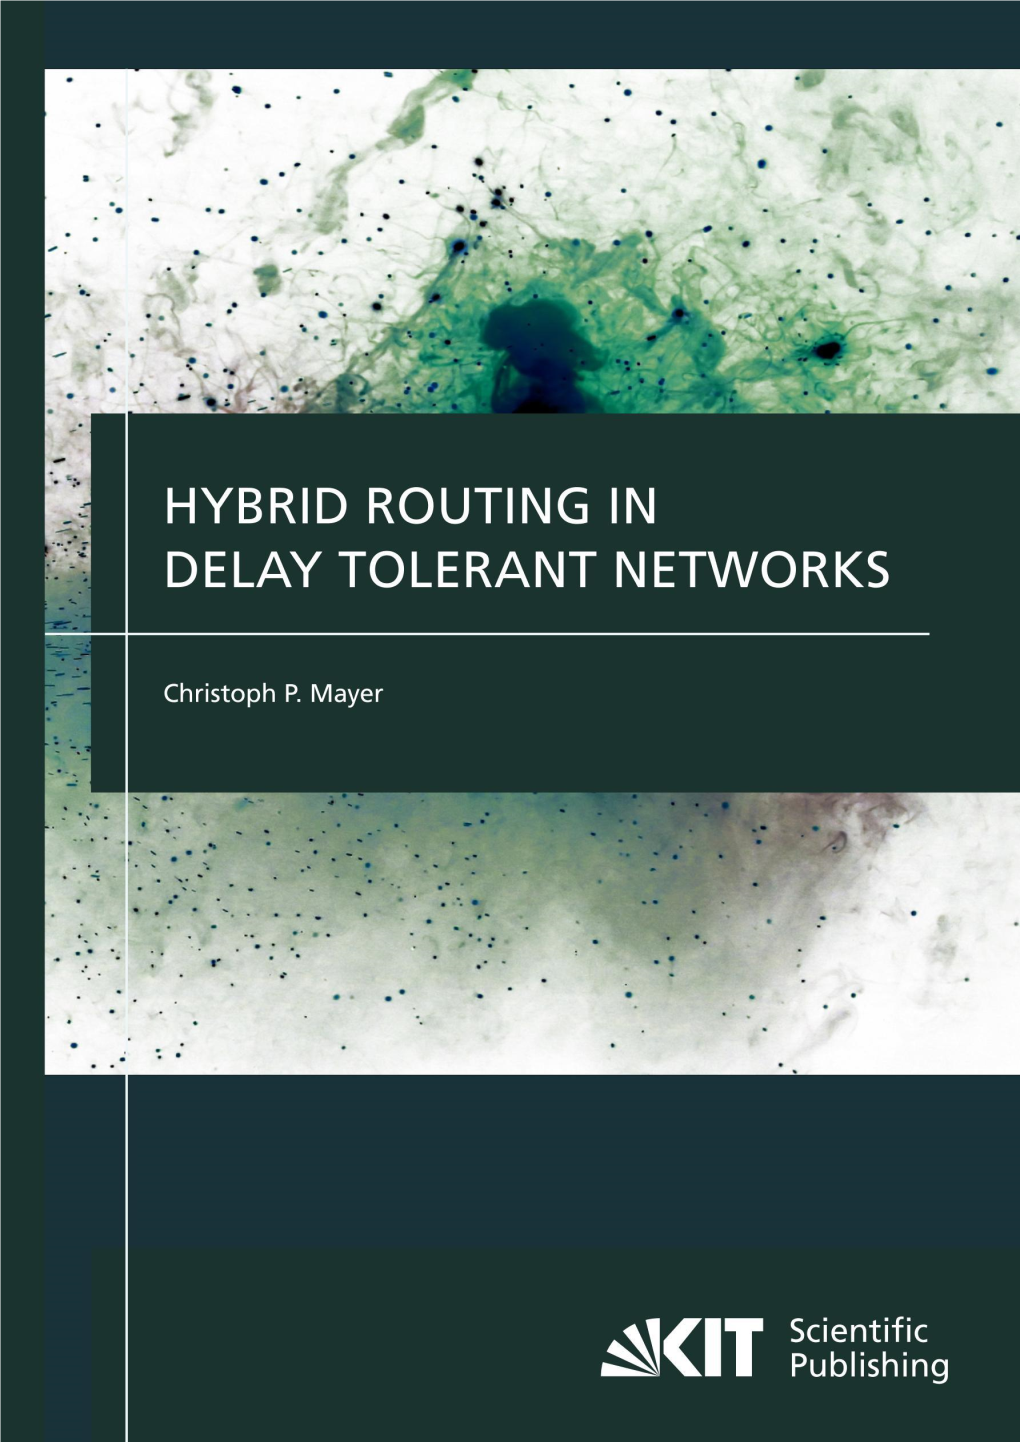 Hybrid Routing in Delay Tolerant Networks